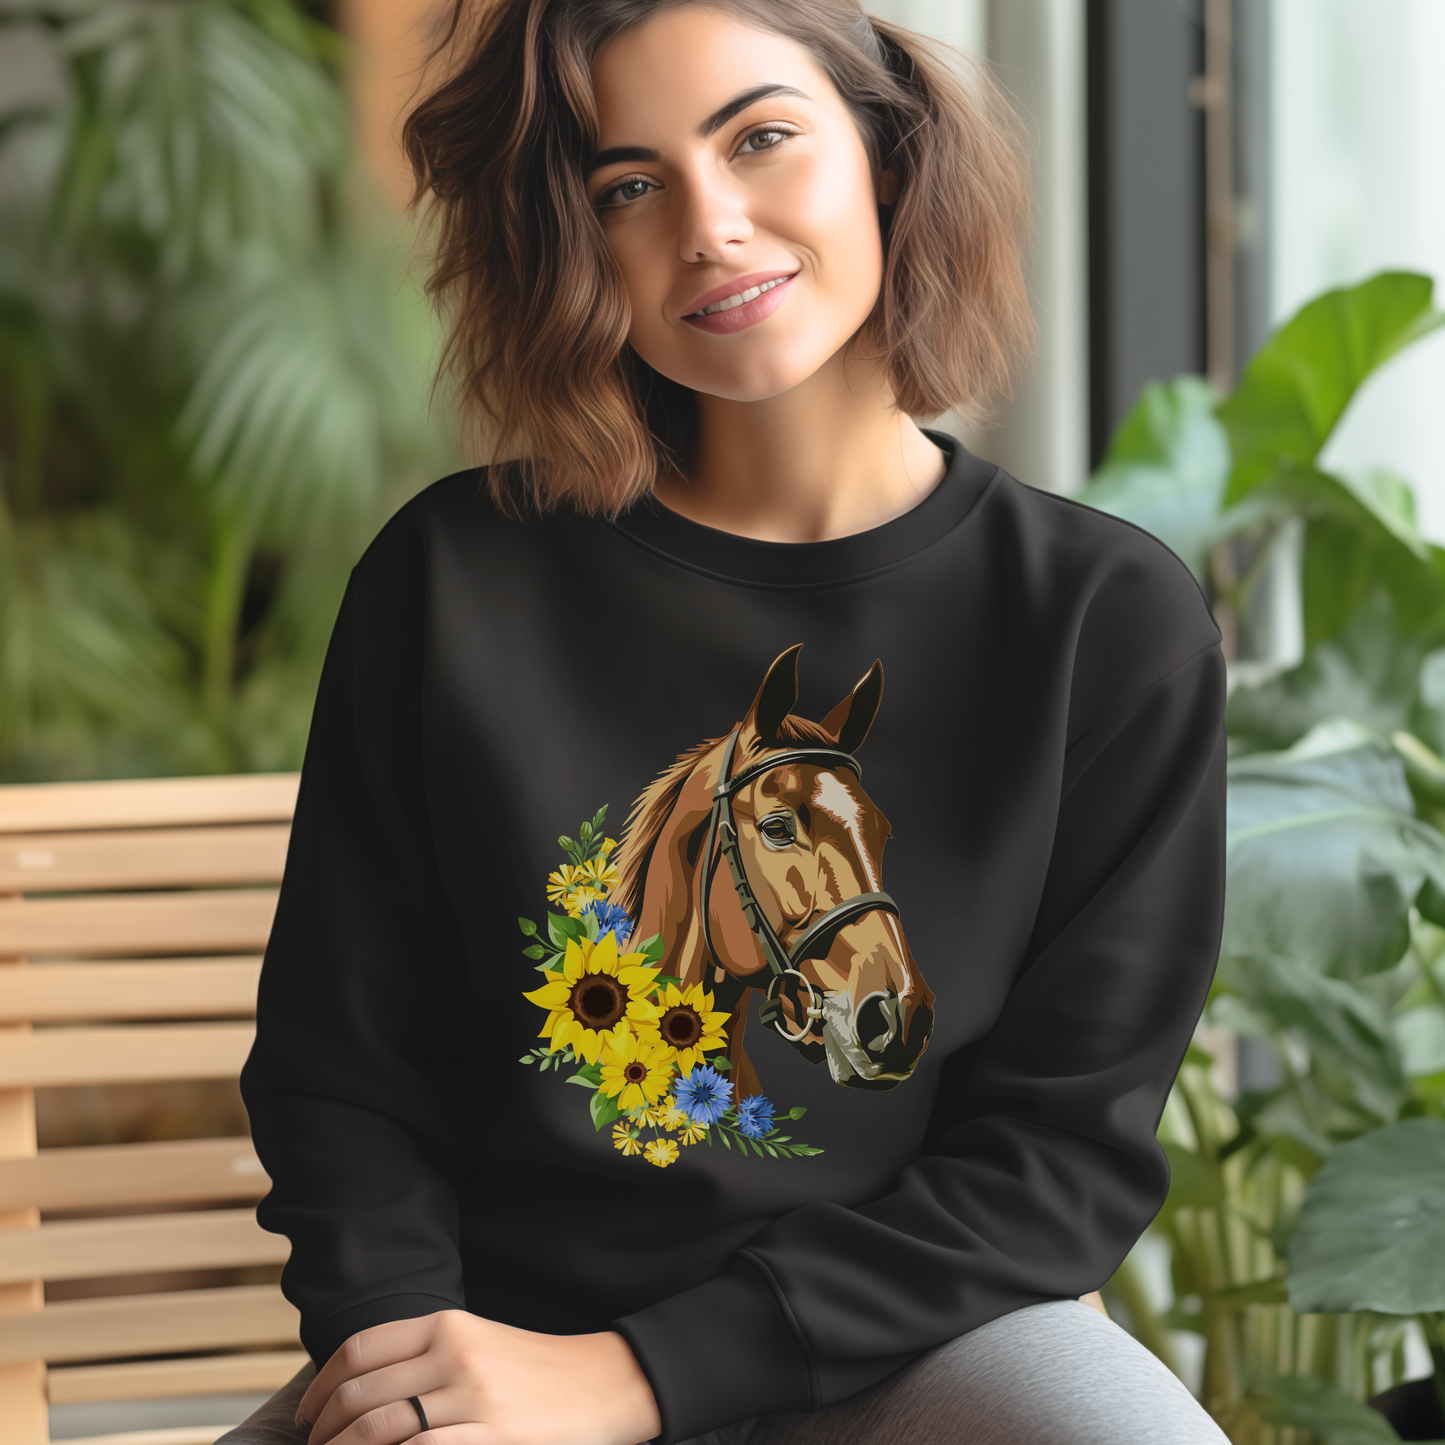 Women sitting on a chair wearing a black sweatshirt with a printed design of a brown horse with a sunflower arrangement